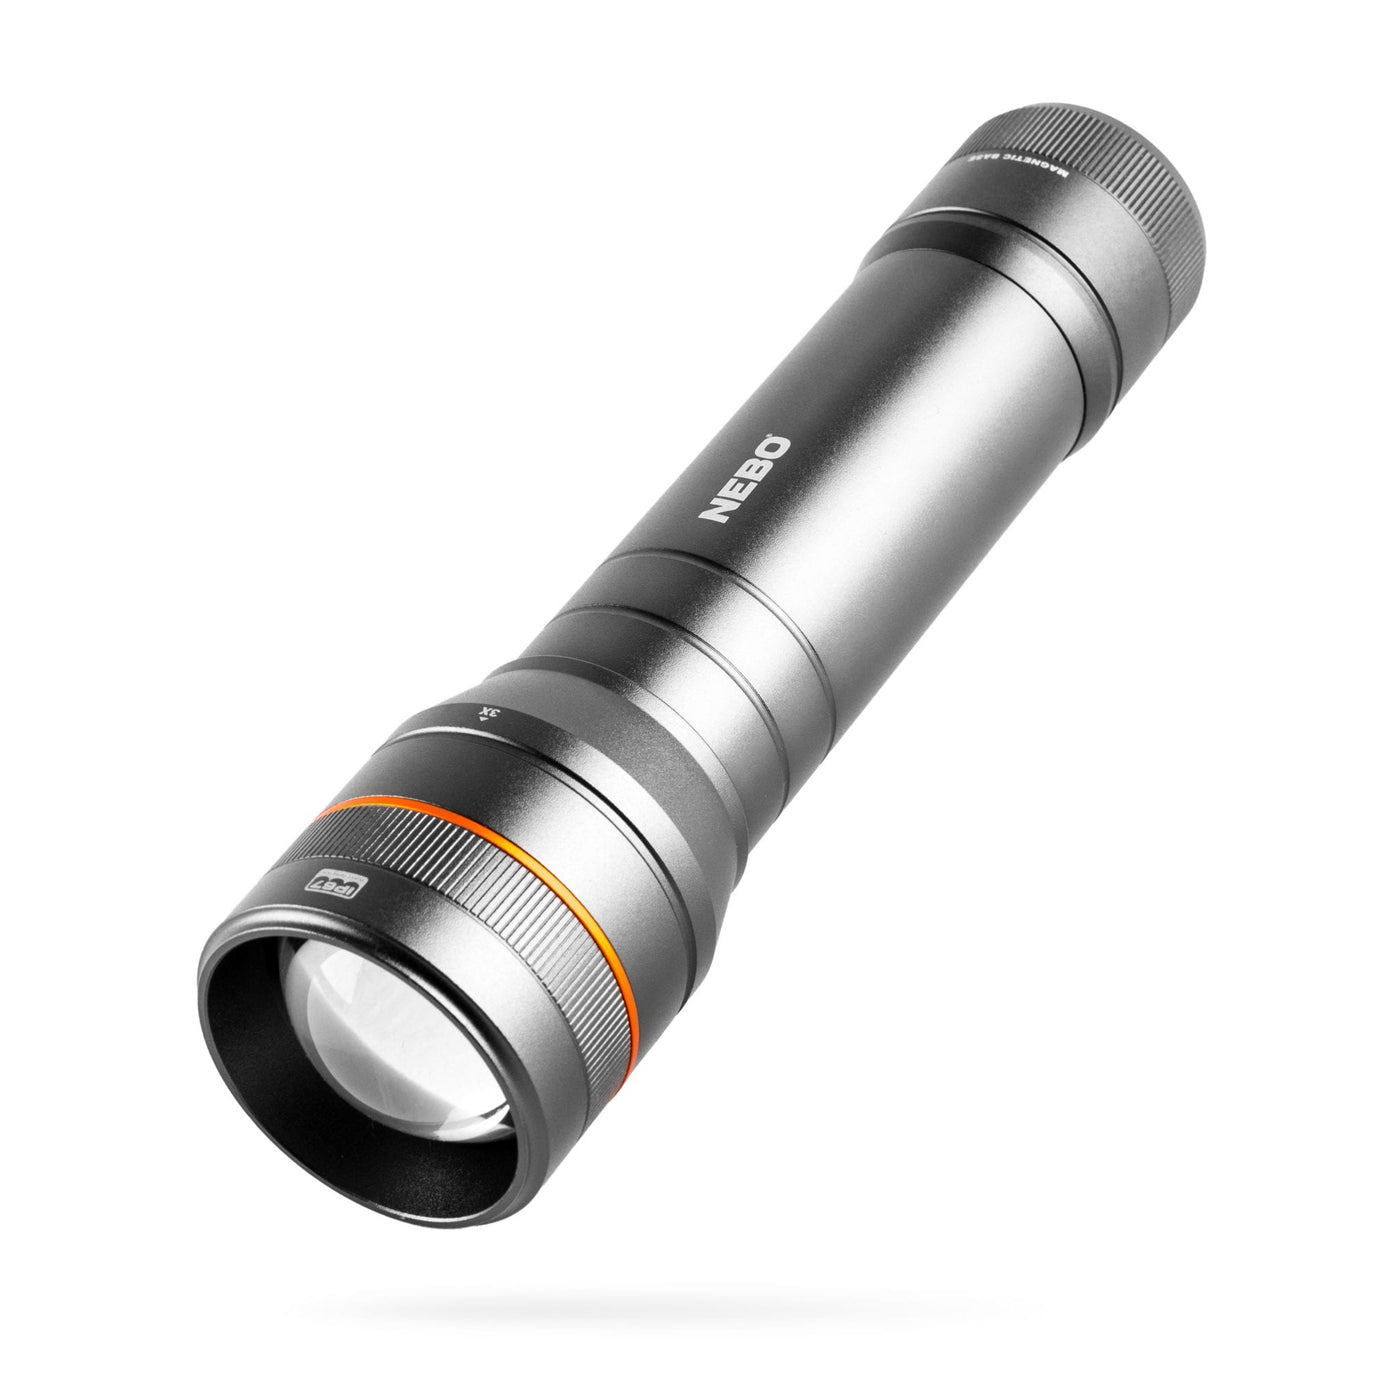 At Nebo Tools, we continually innovate so that we can offer the highest quality LED lighting products at the best price. The Newton™ 1000 lumen flashlight by NEBO is a powerful handheld flashlight with 4 light modes. The included mode selection dial makes it easy to switch between modes and the powerful LED in this flashlight can light up 155 meters.